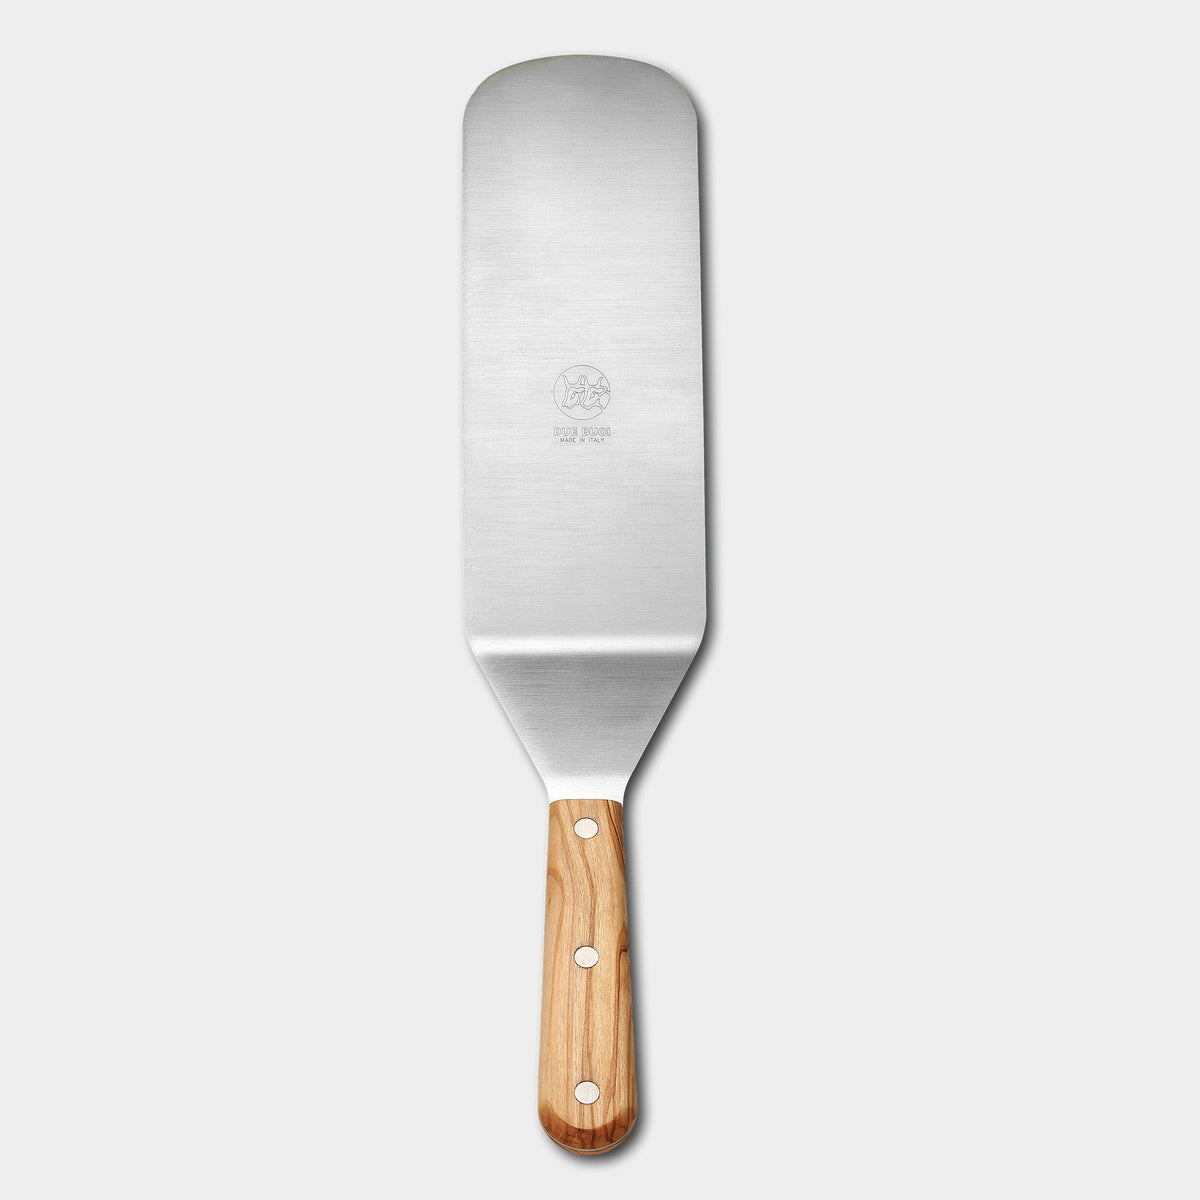 Wide+Small Stainless Steel Spatulas | Due Buoi Spatula Store